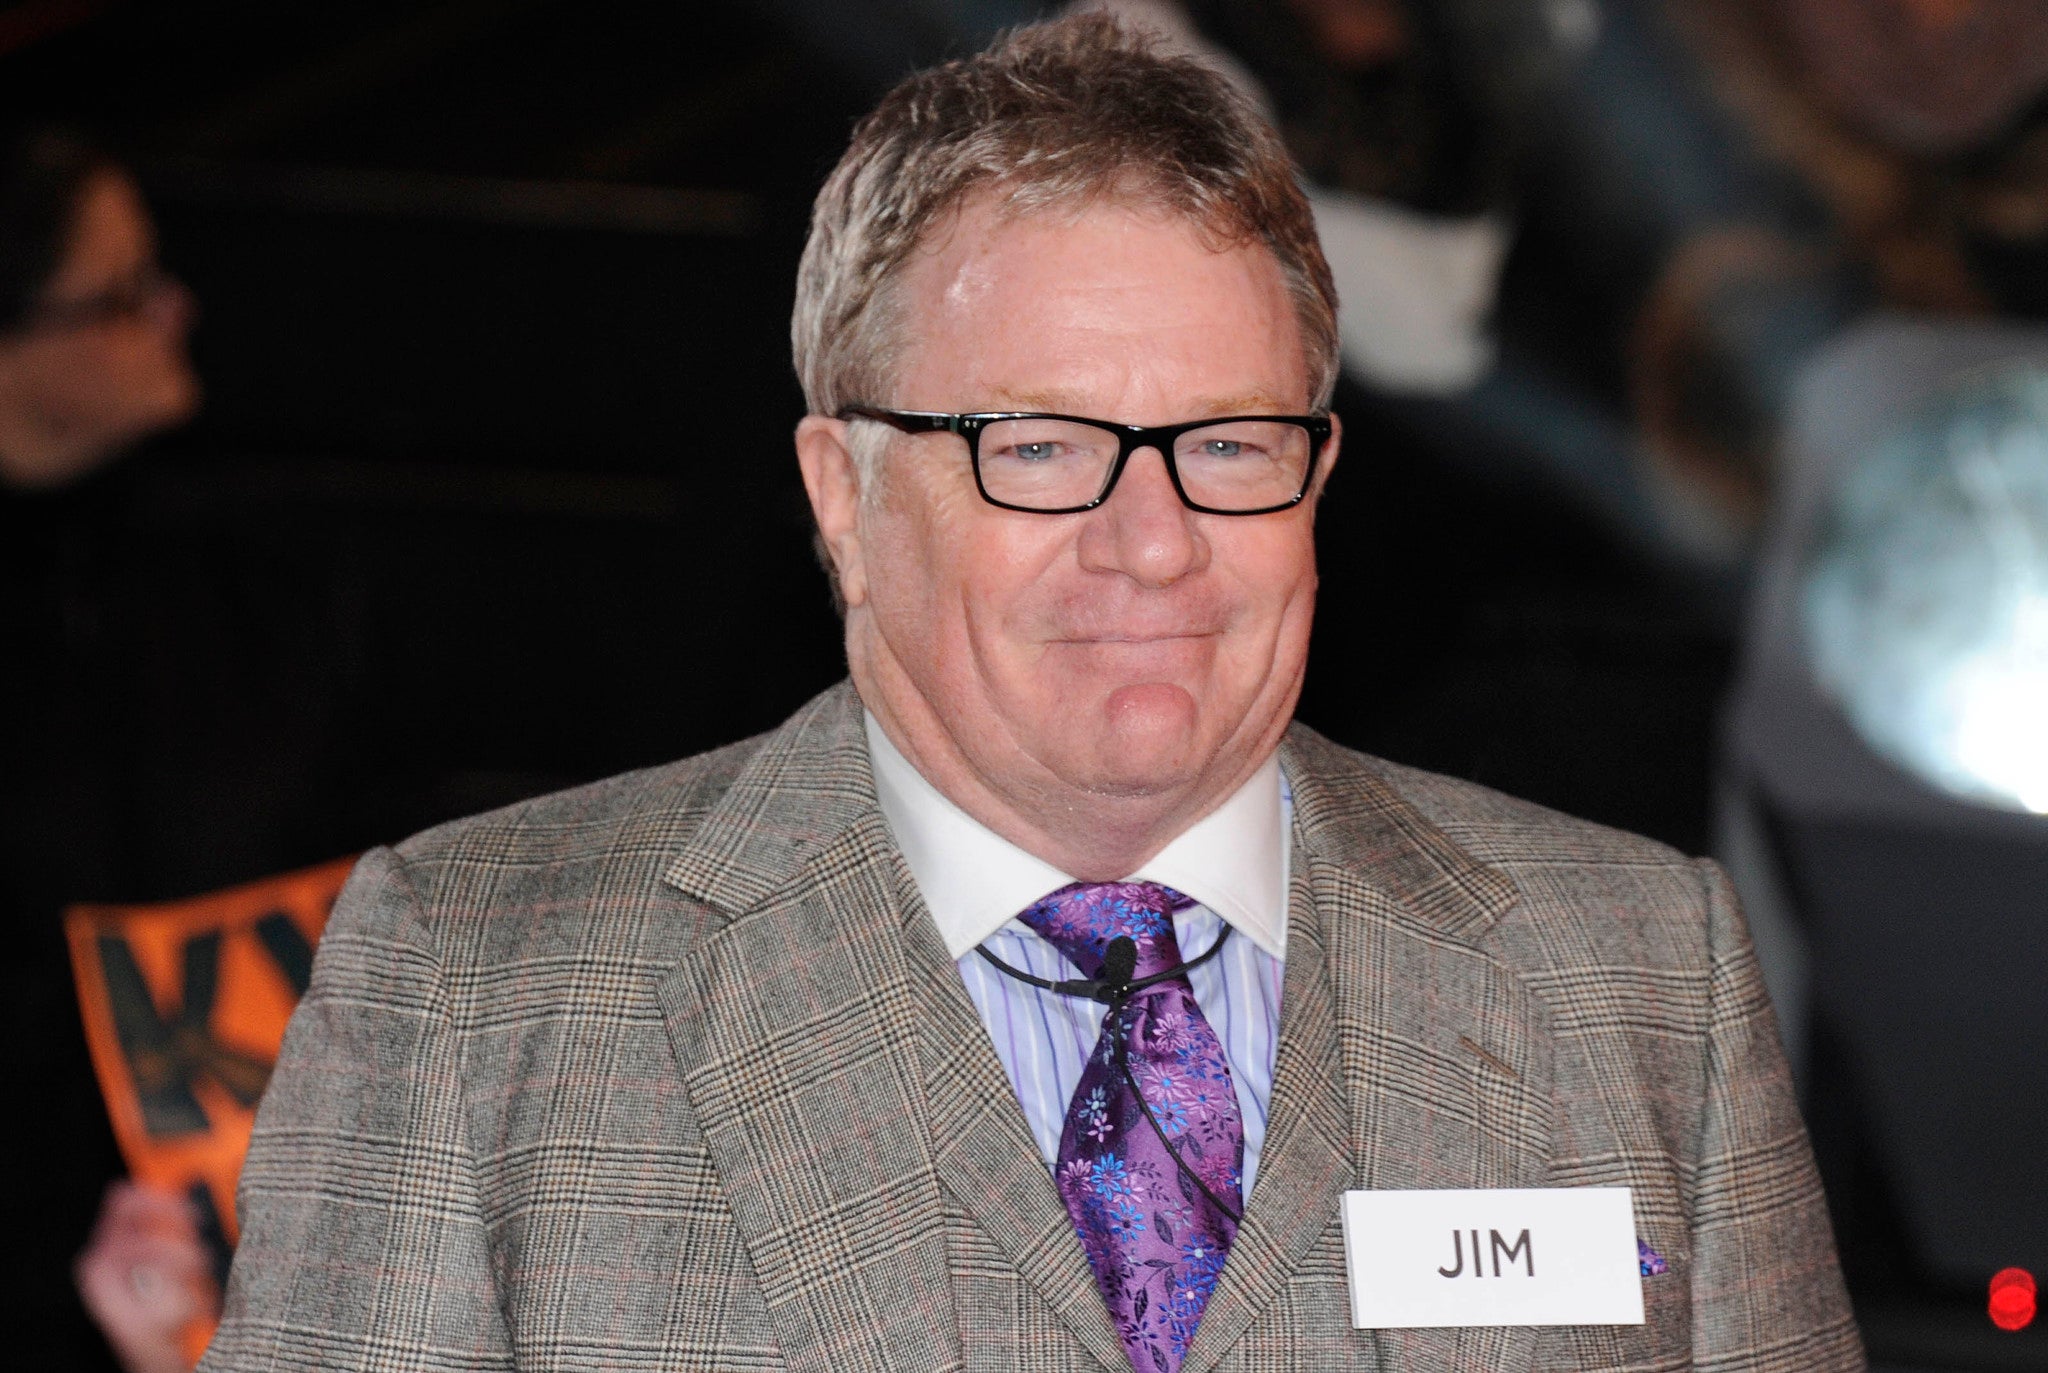 Comedian Jim Davidson has rejected claims that he "ranted" about fellow celebrities